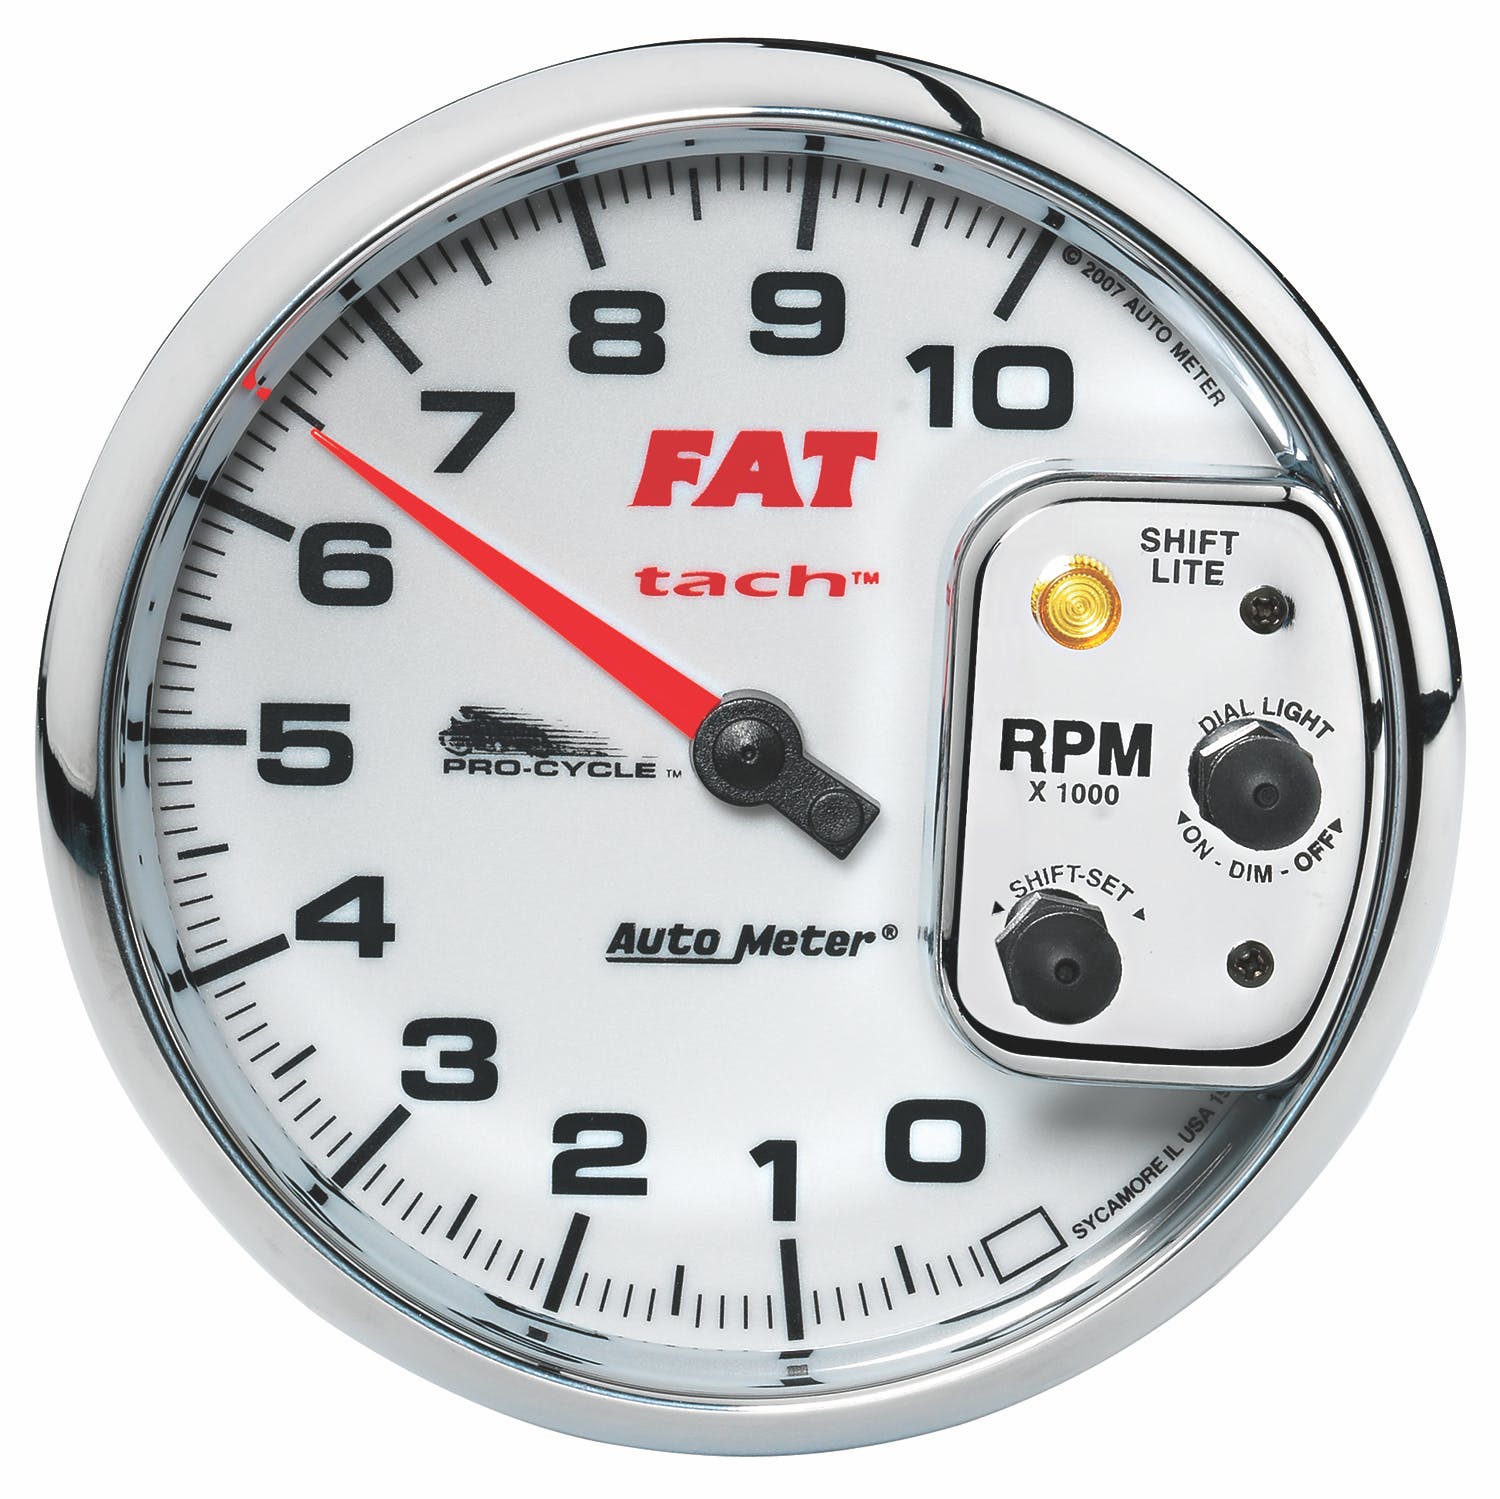 AutoMeter Products 19265 Tachometer Gauge, White-Pro Cycle 5, 10K RPM, Shift Lite 2and4 Cylinder, Fat